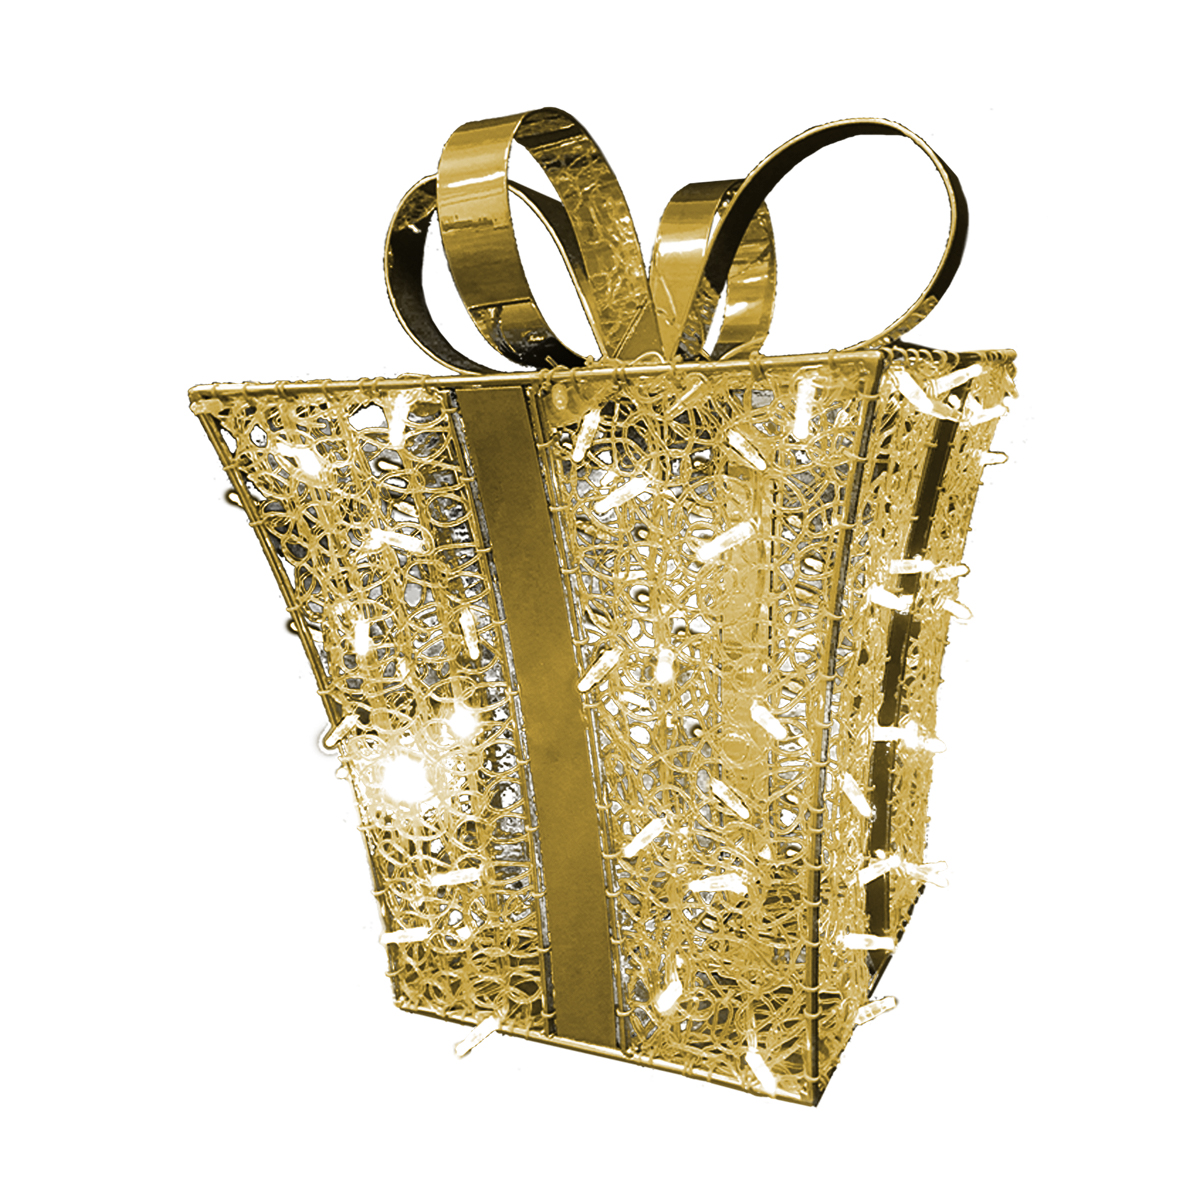 3D Square Gift Box - 2.2ft Tall - Christmas Display - Gold